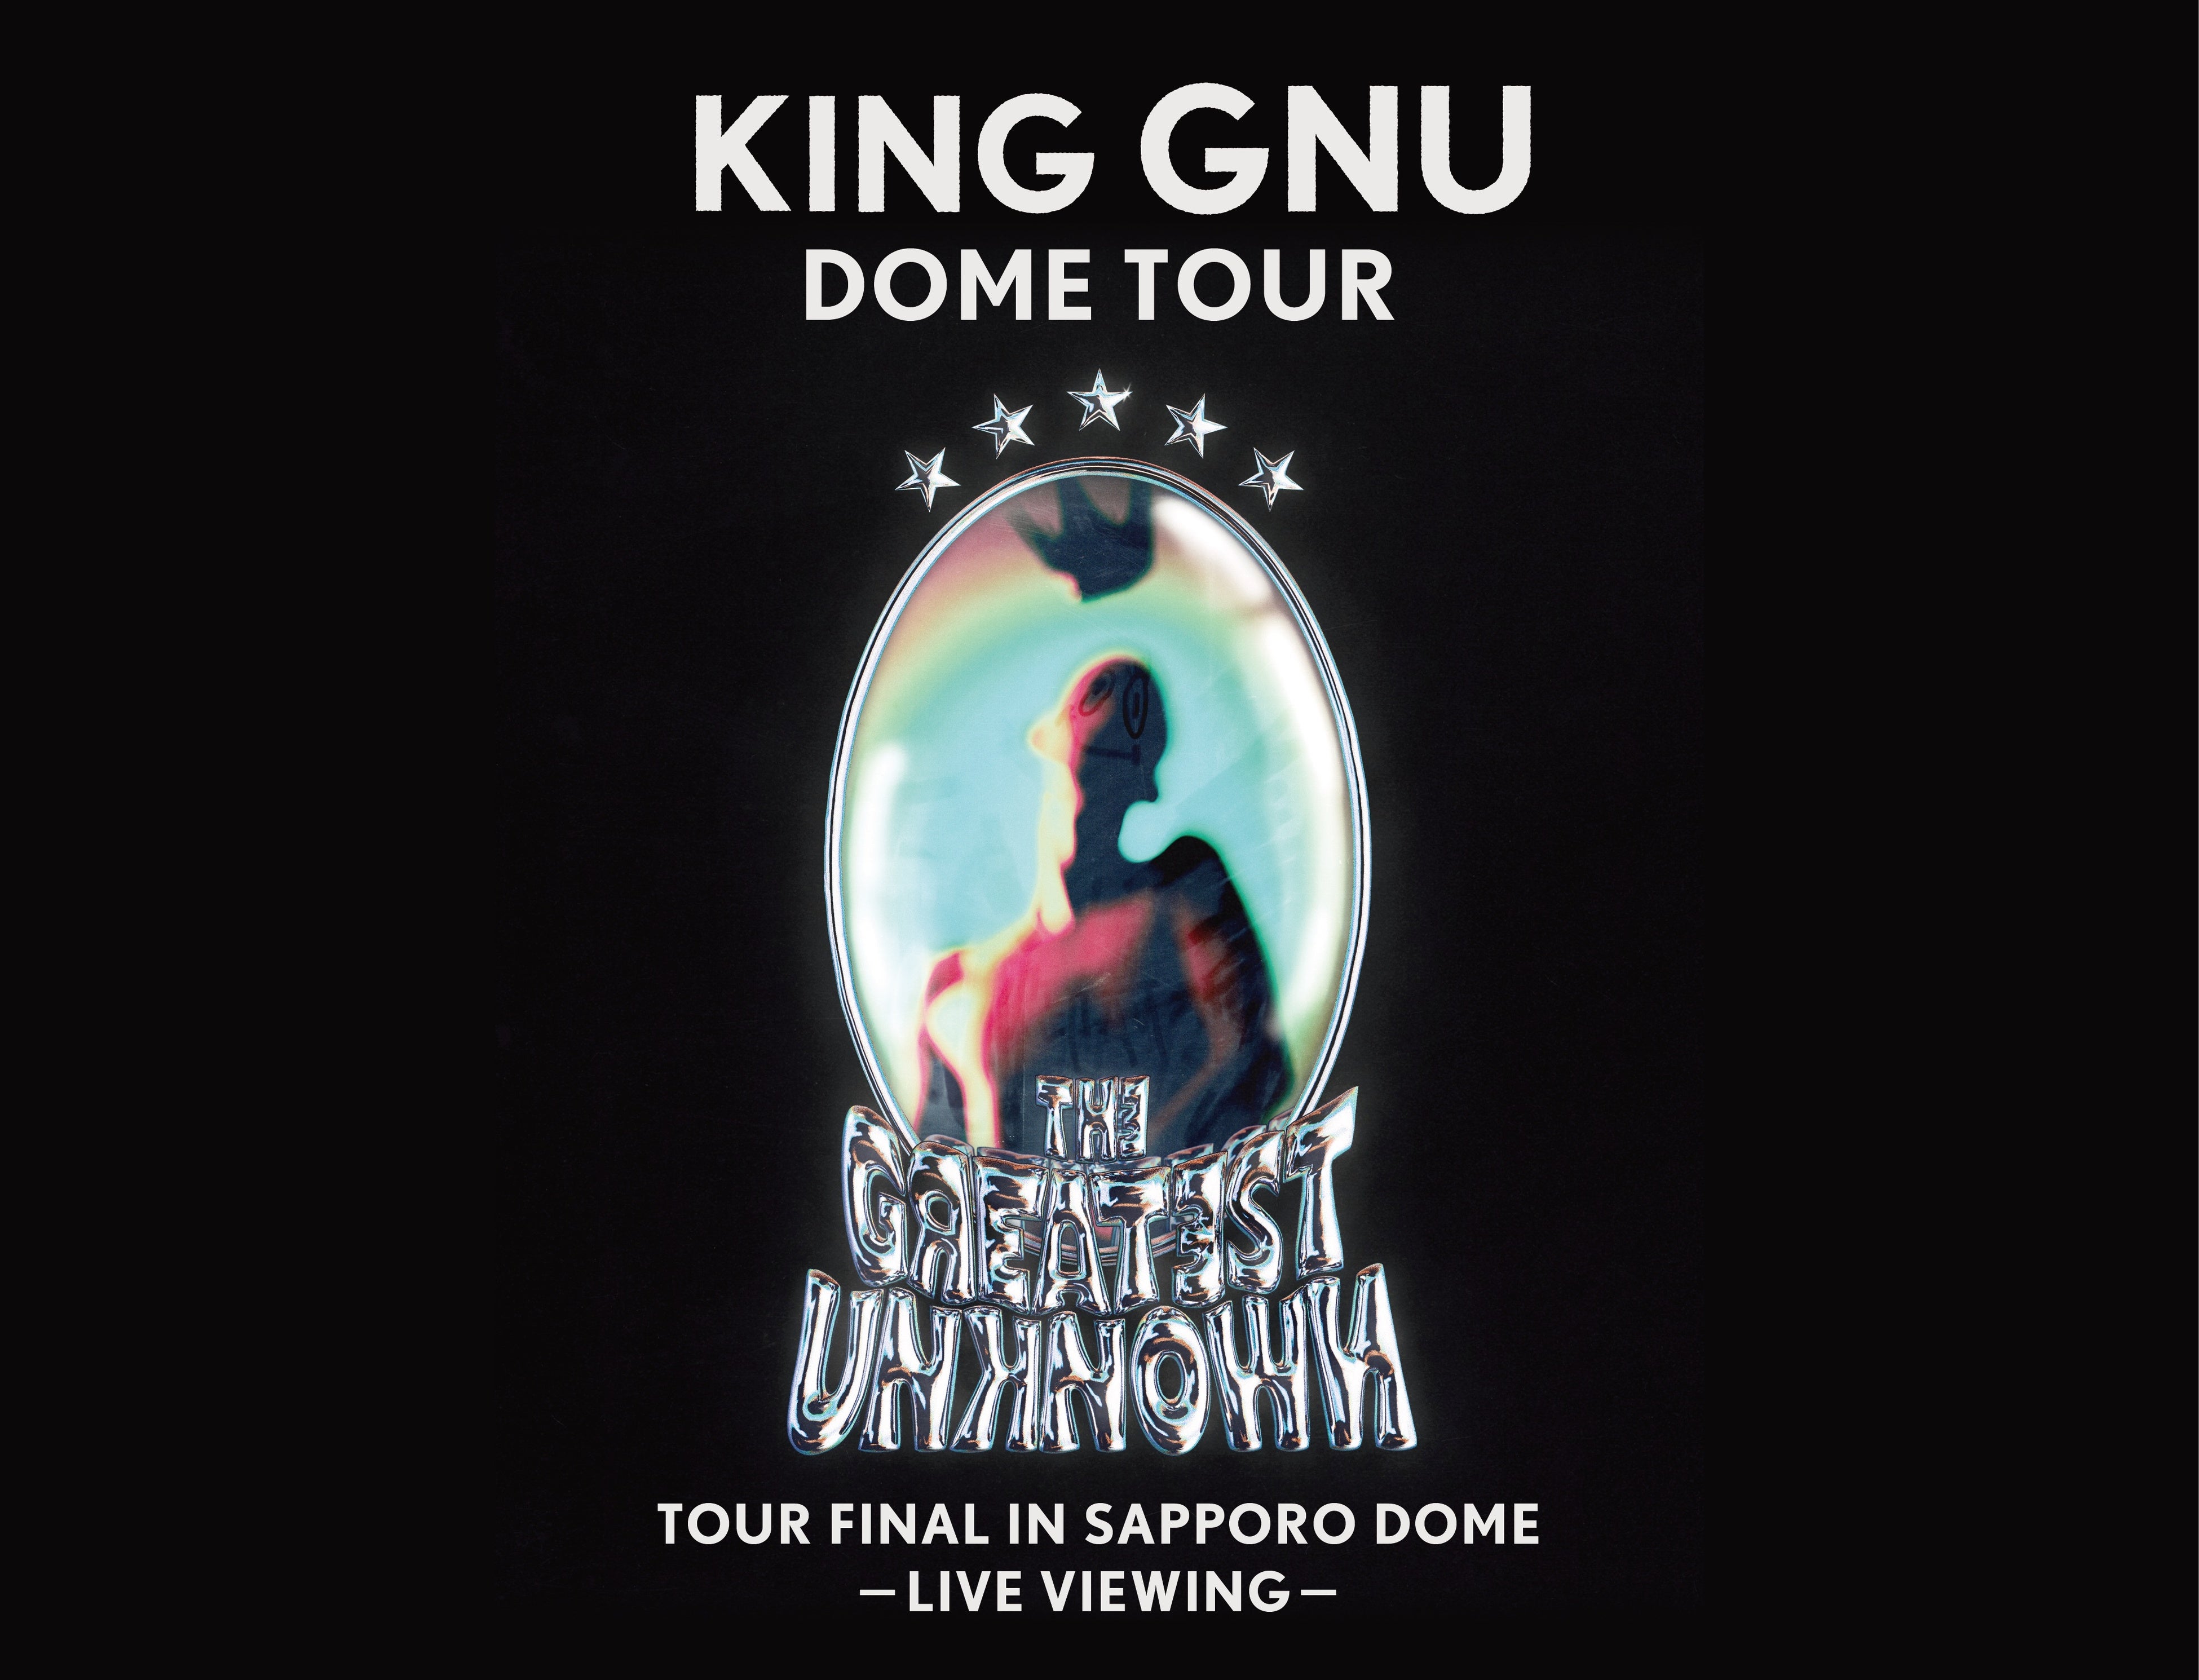 King Gnu Dome TouruTHE GREATEST UNKNOWNvTOUR FINAL in Sapporo Dome \LIVE VIEWING\JÌI